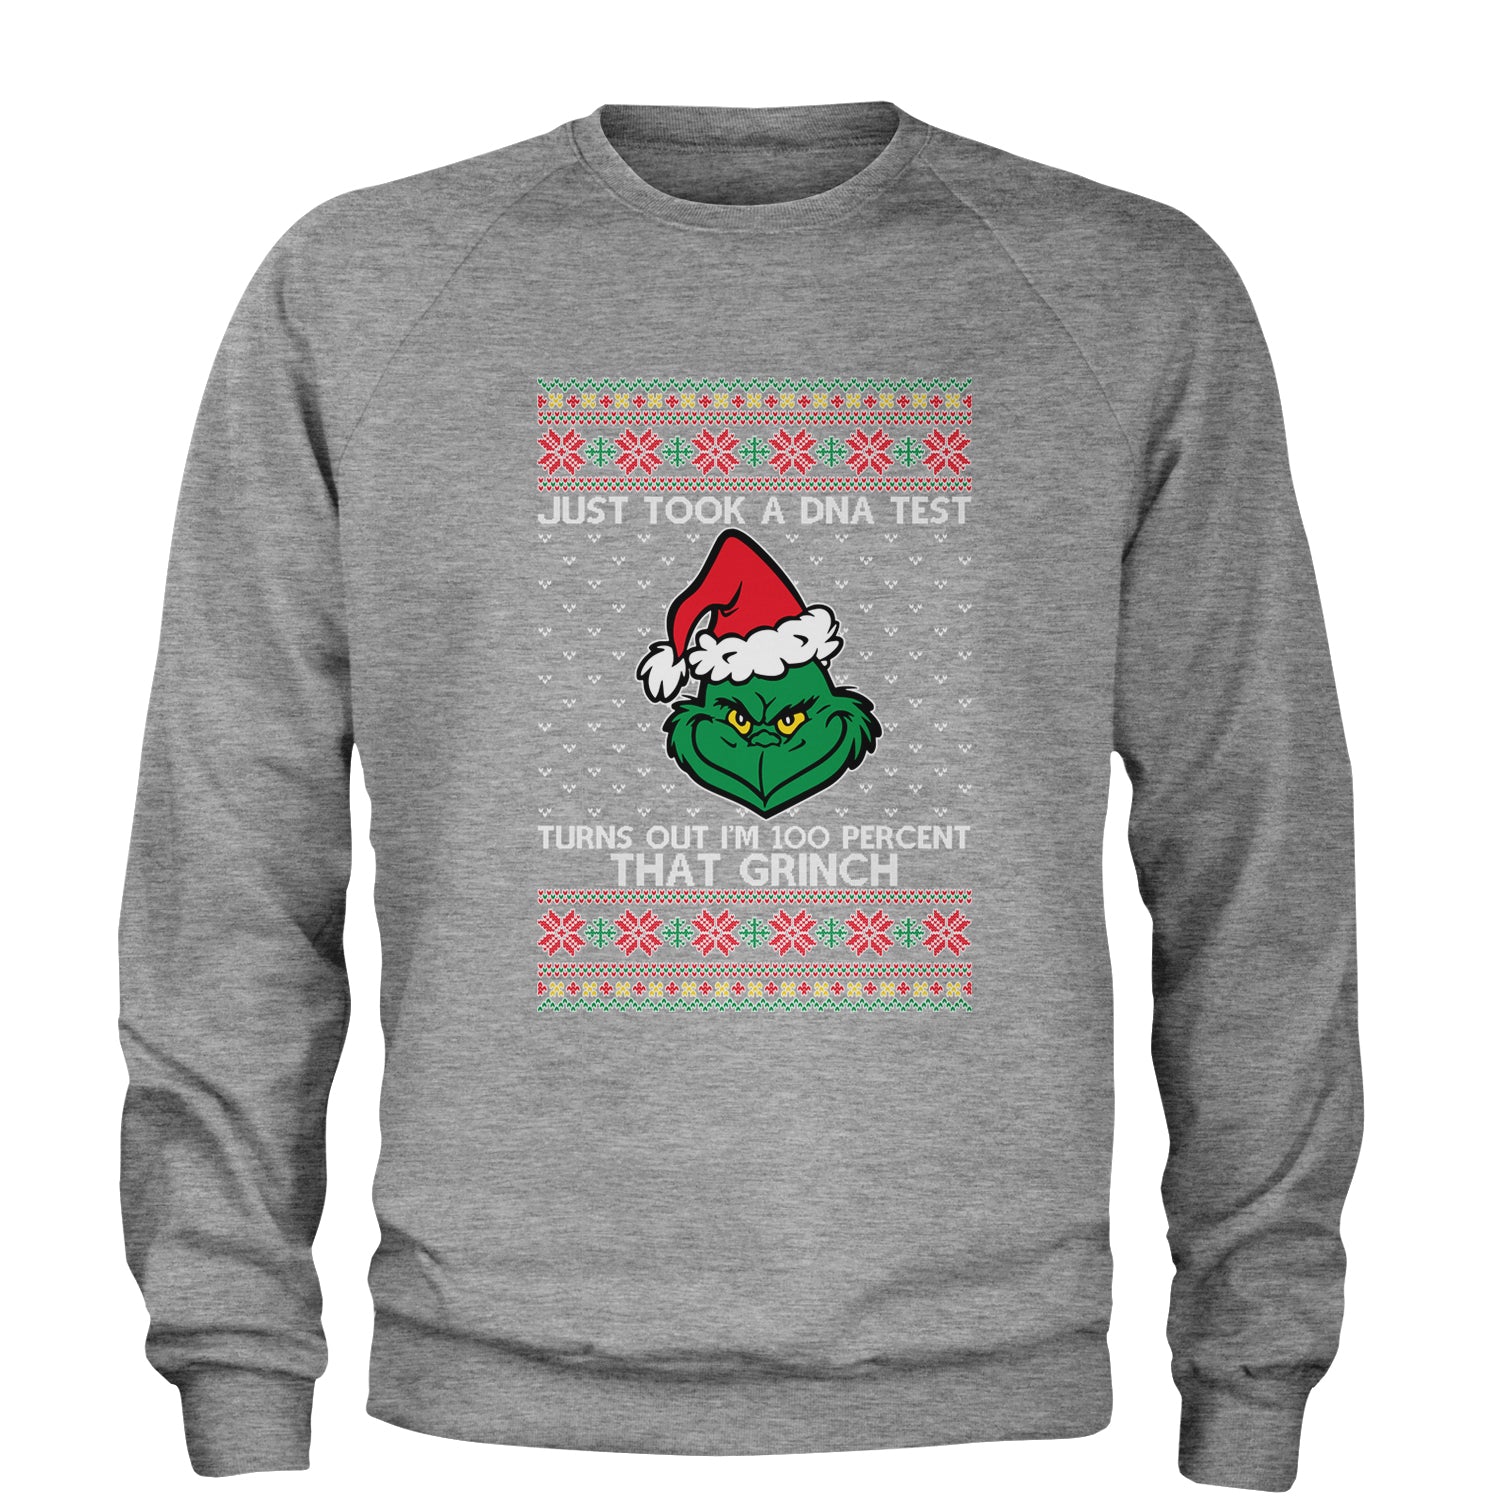 One Hundred Percent That Grinch Adult Crewneck Sweatshirt christmas, grinch, sweater, sweatshirt, ugly, xmas by Expression Tees